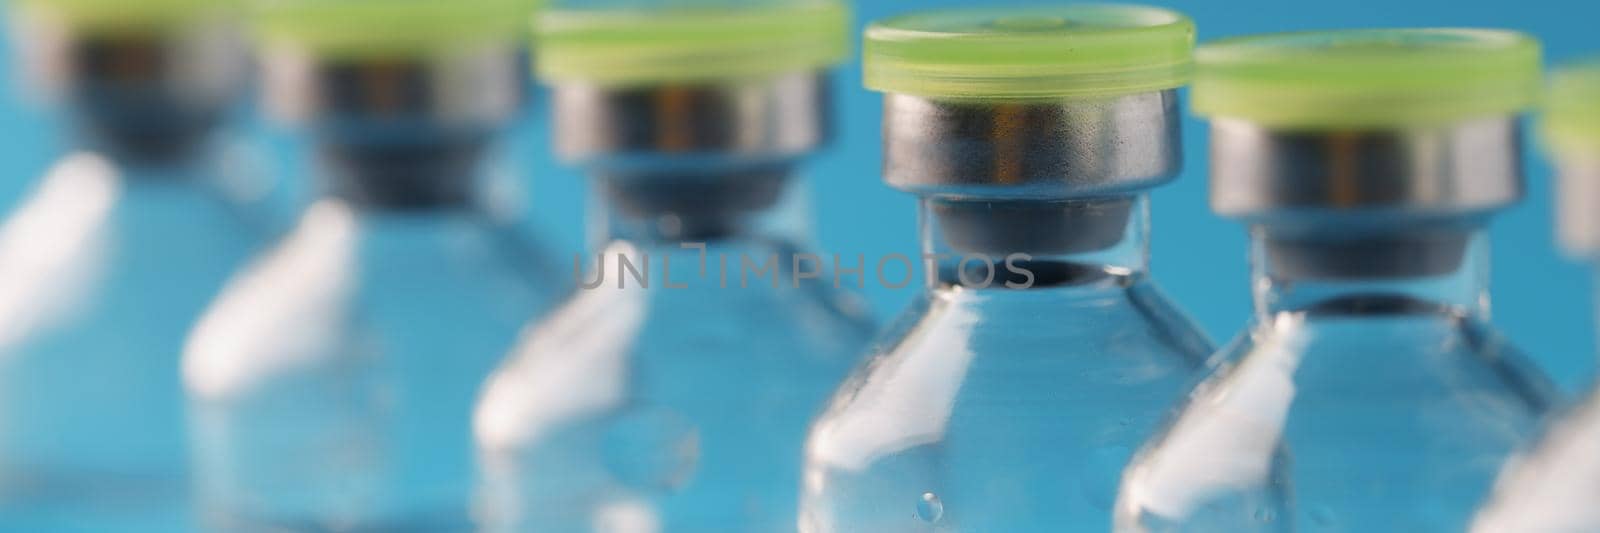 Close-up of glass vials with liquid samples in laboratory, vaccine in bottles, medicine in ampoules. Medication against bacteria and viruses, antibiotics. Stop covid, medicine, healthcare concept